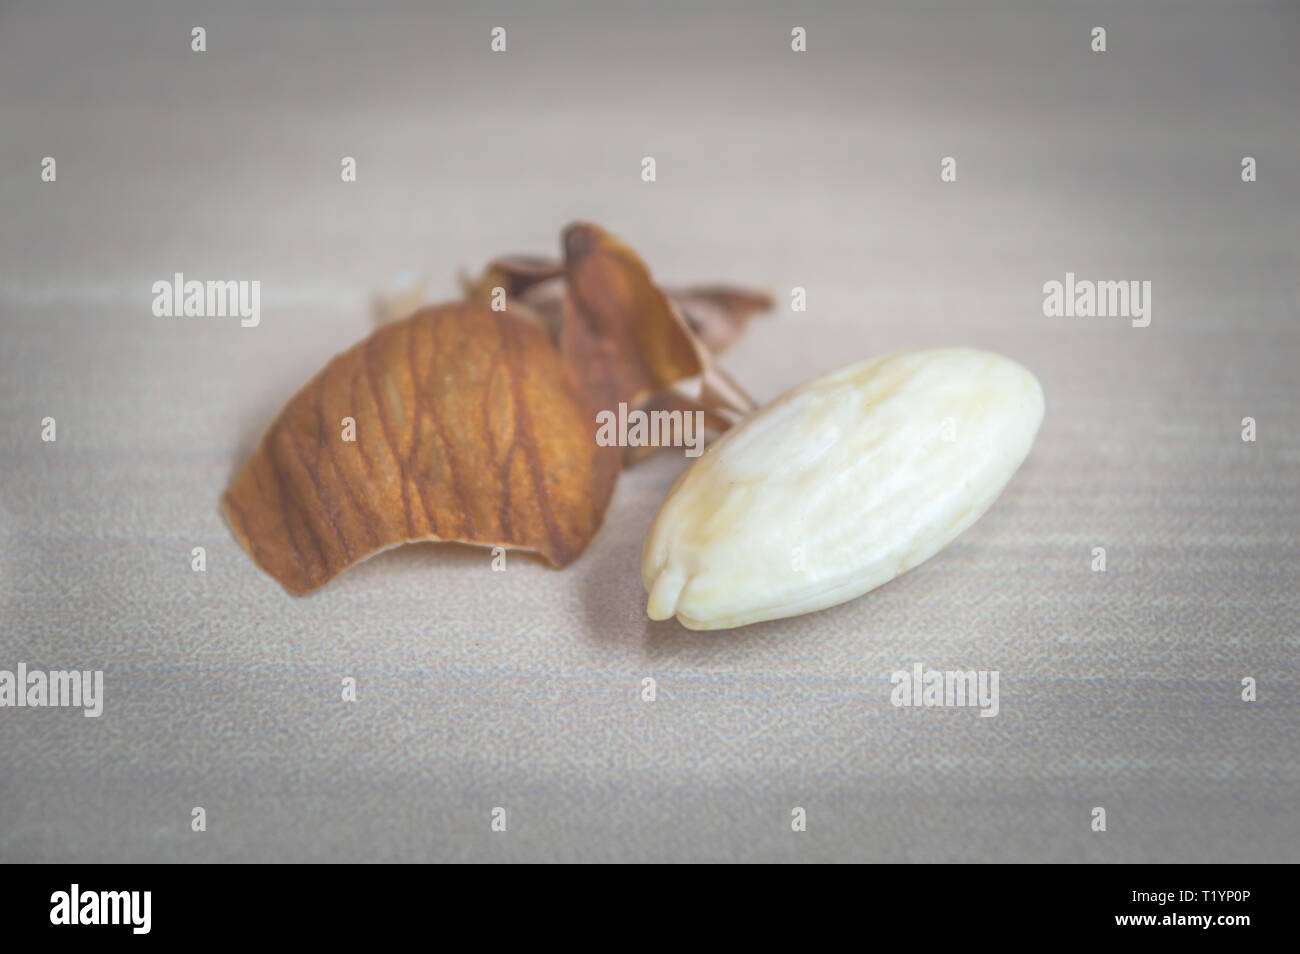 An almond peeled off its skin. White Almond kernel Stock Photo